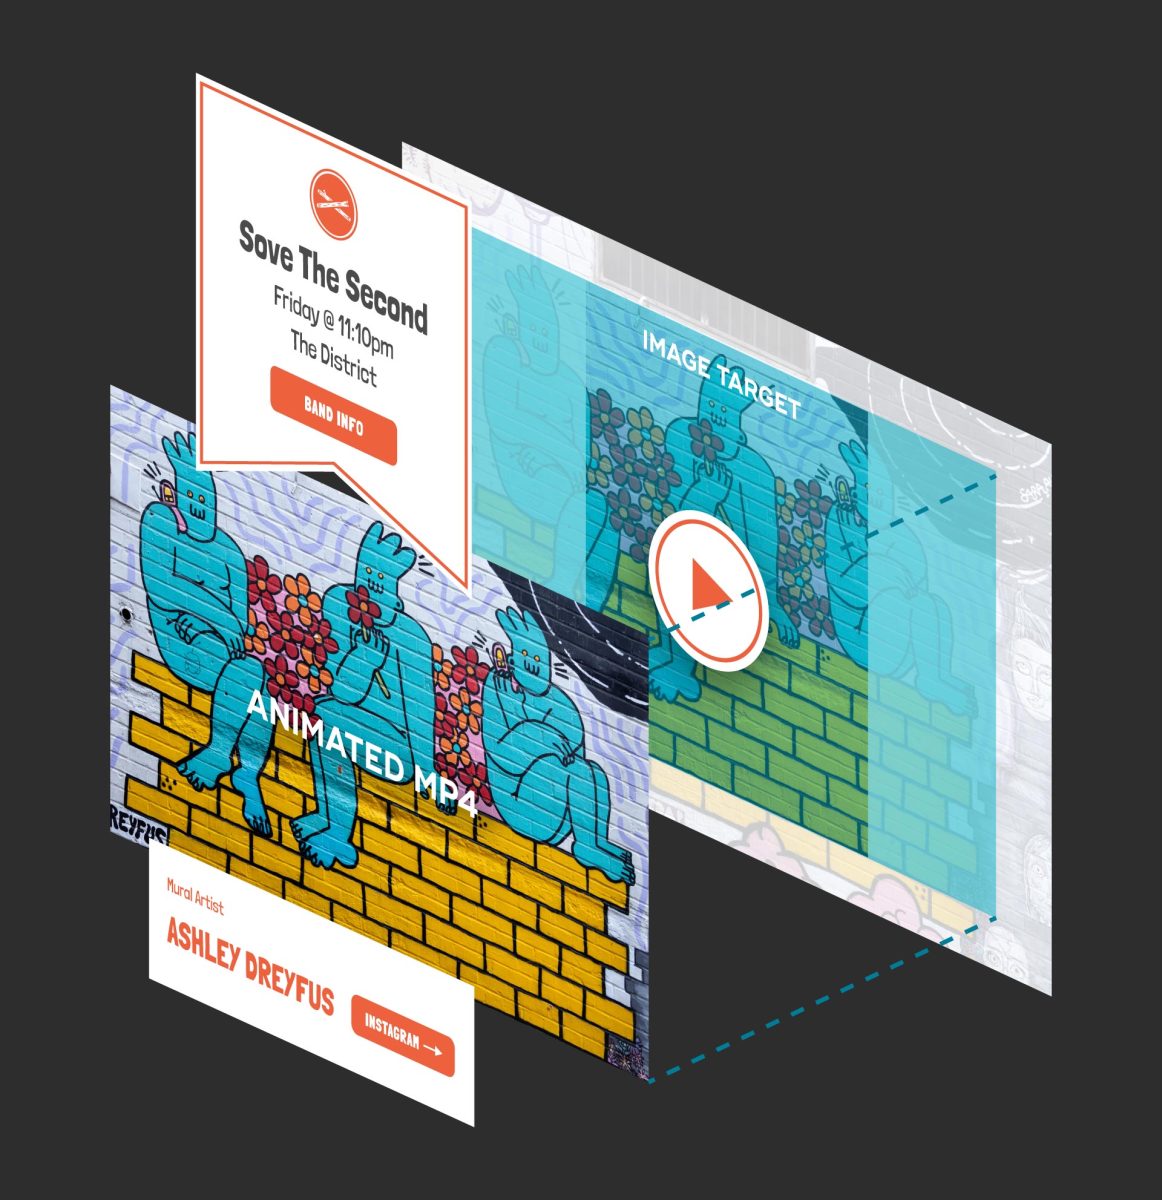 A three quarter view mockup showing the AR element layers in relation to the image target and mural wall